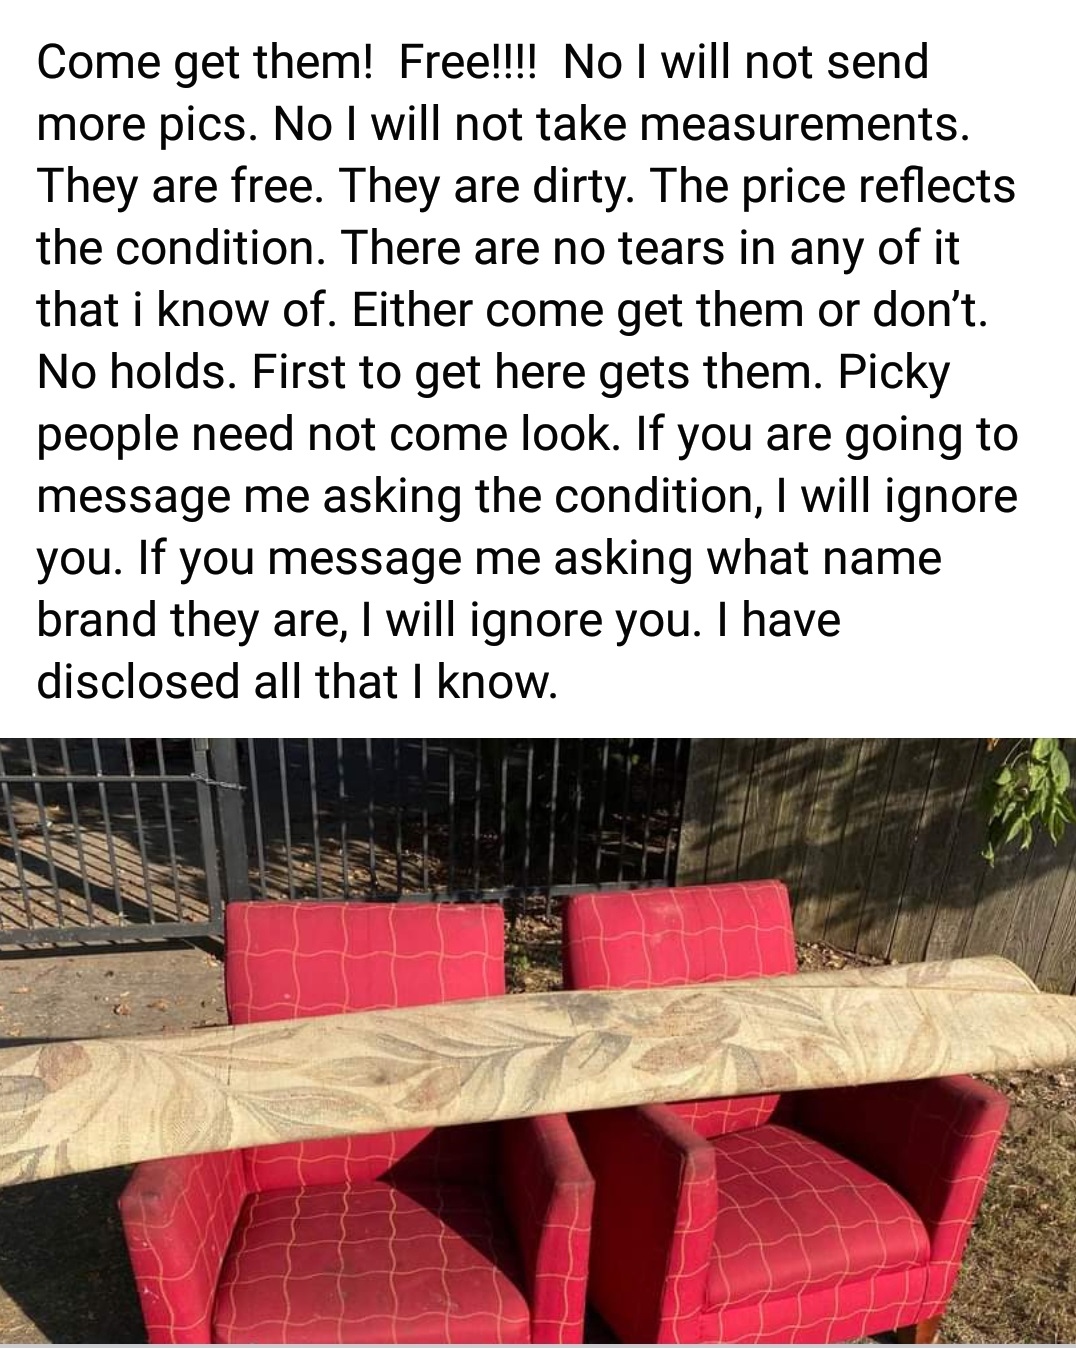 entitled people - table - Come get them! Free!!!! No I will not send more pics. No I will not take measurements. They are free. They are dirty. The price reflects the condition. There are no tears in any of it that i know of. Either come get them or don't